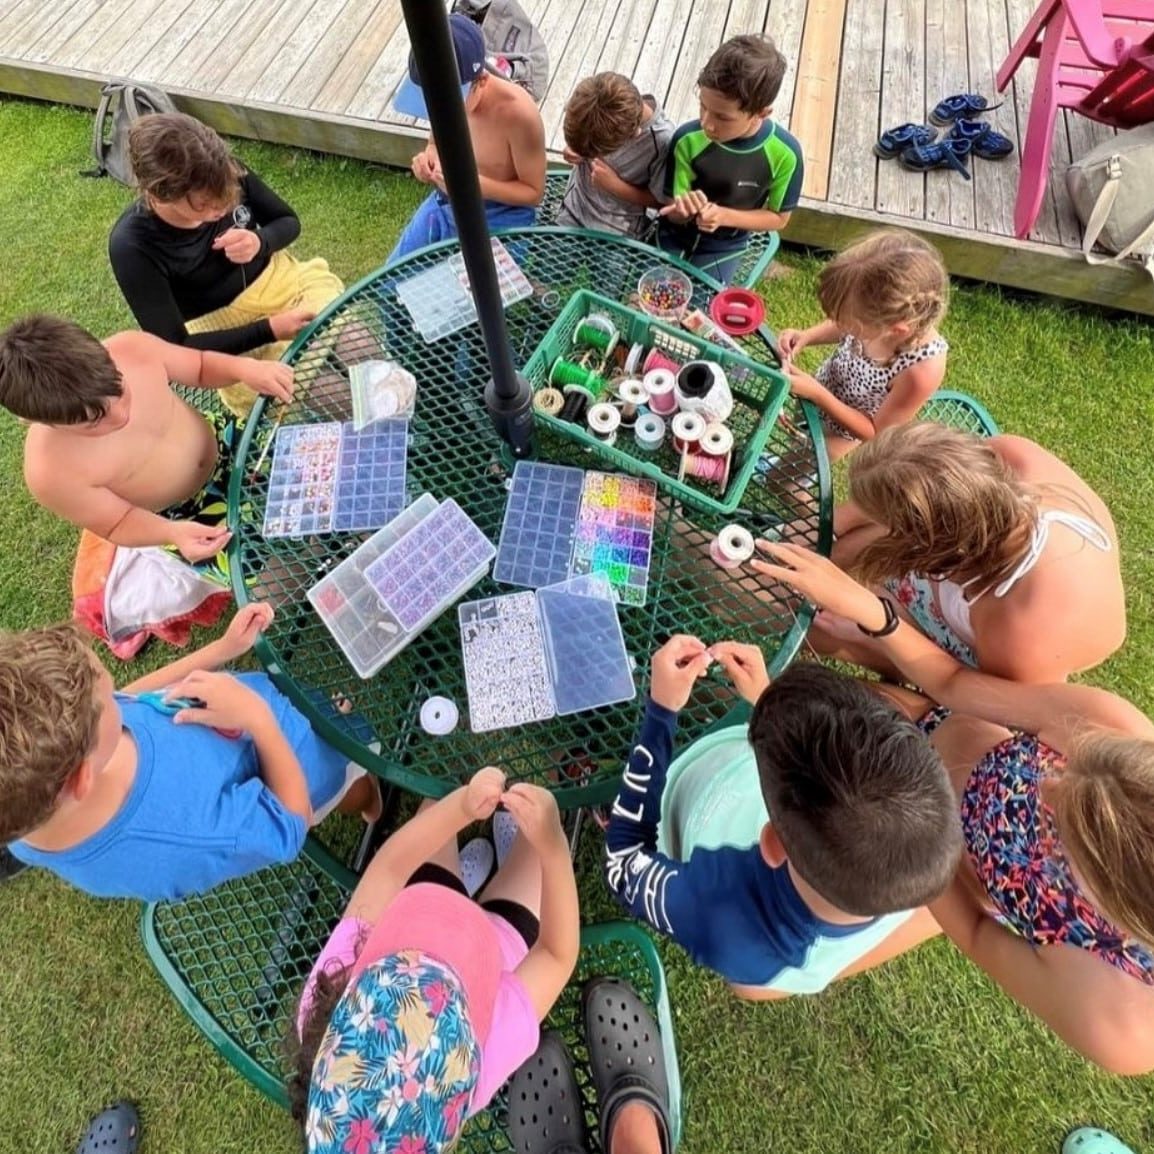 A group of kids doing arts and crafts outside